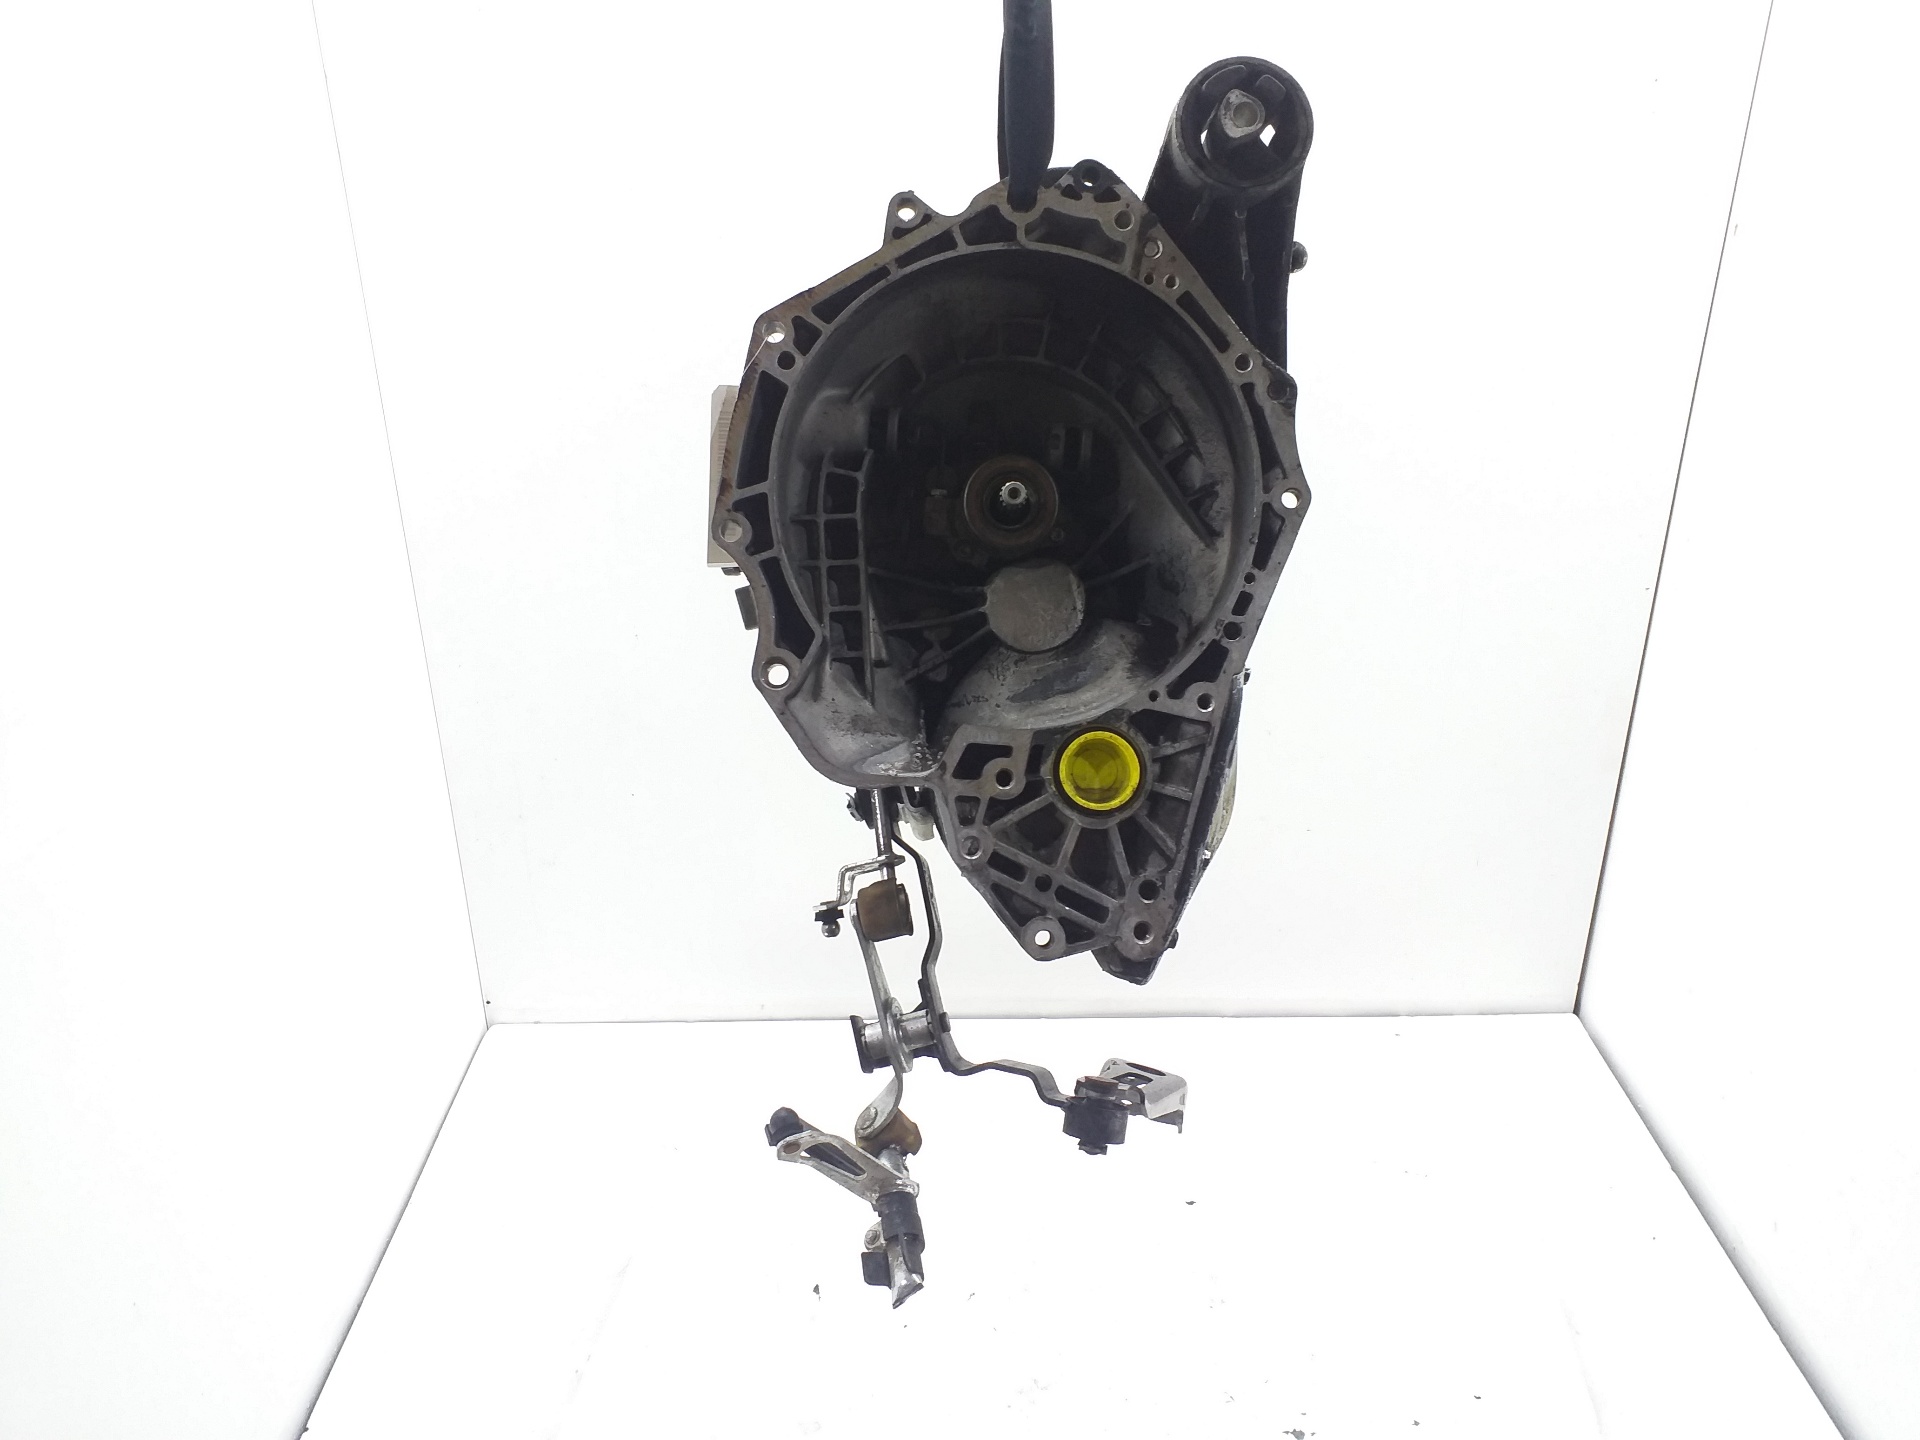 OPEL Astra H (2004-2014) Gearbox F17C374 23552009